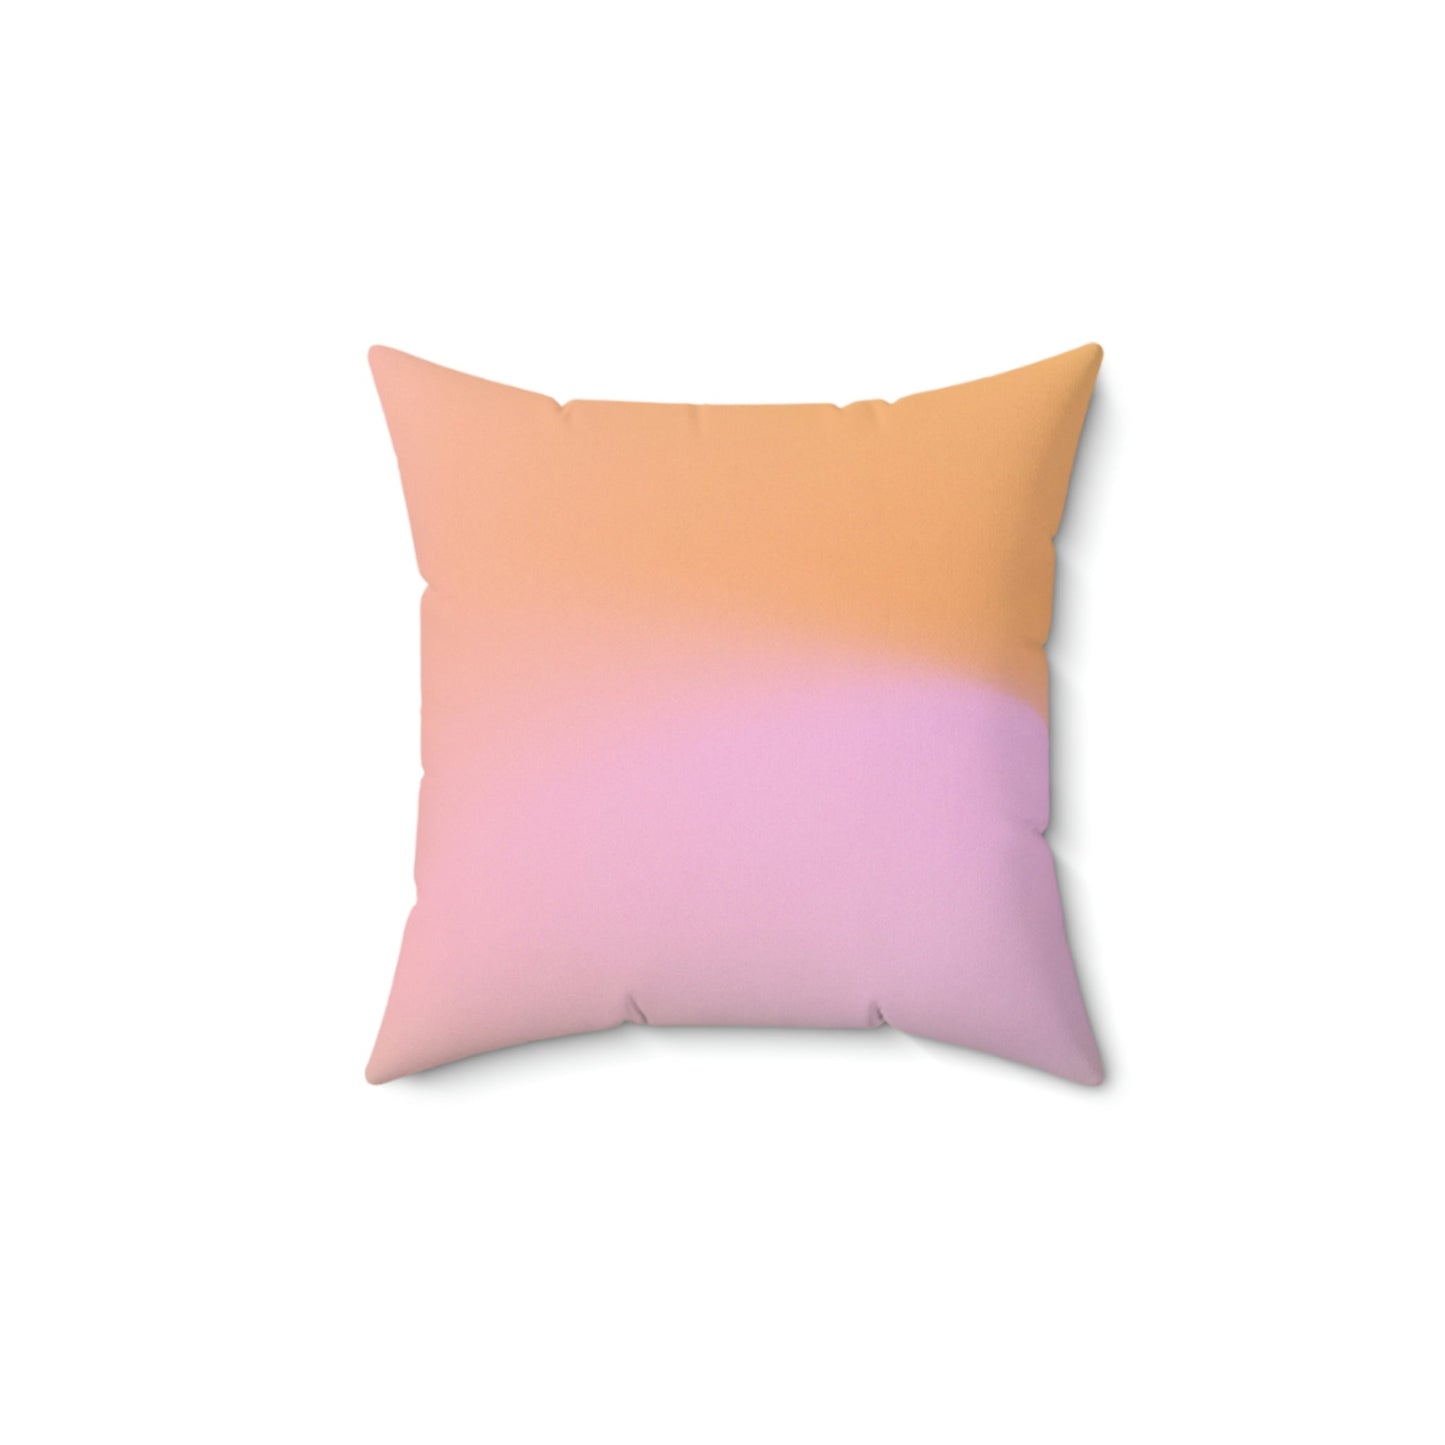 Sweet Duo Square Pillow Home Decor Pink Sweetheart